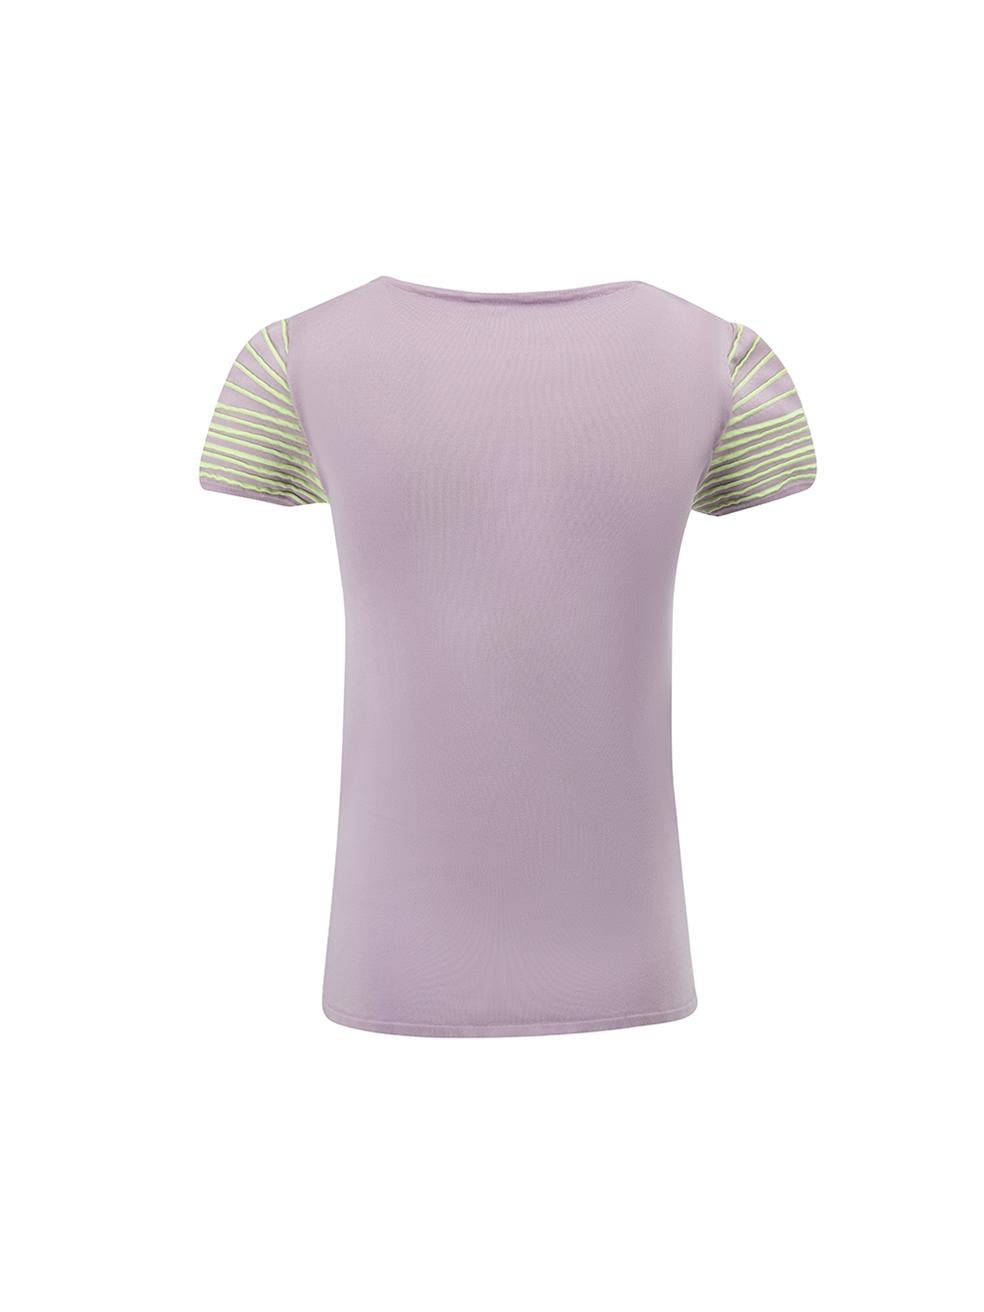 Versace Women's Lilac Shell Print Stretchy T-Shirt In Good Condition For Sale In London, GB